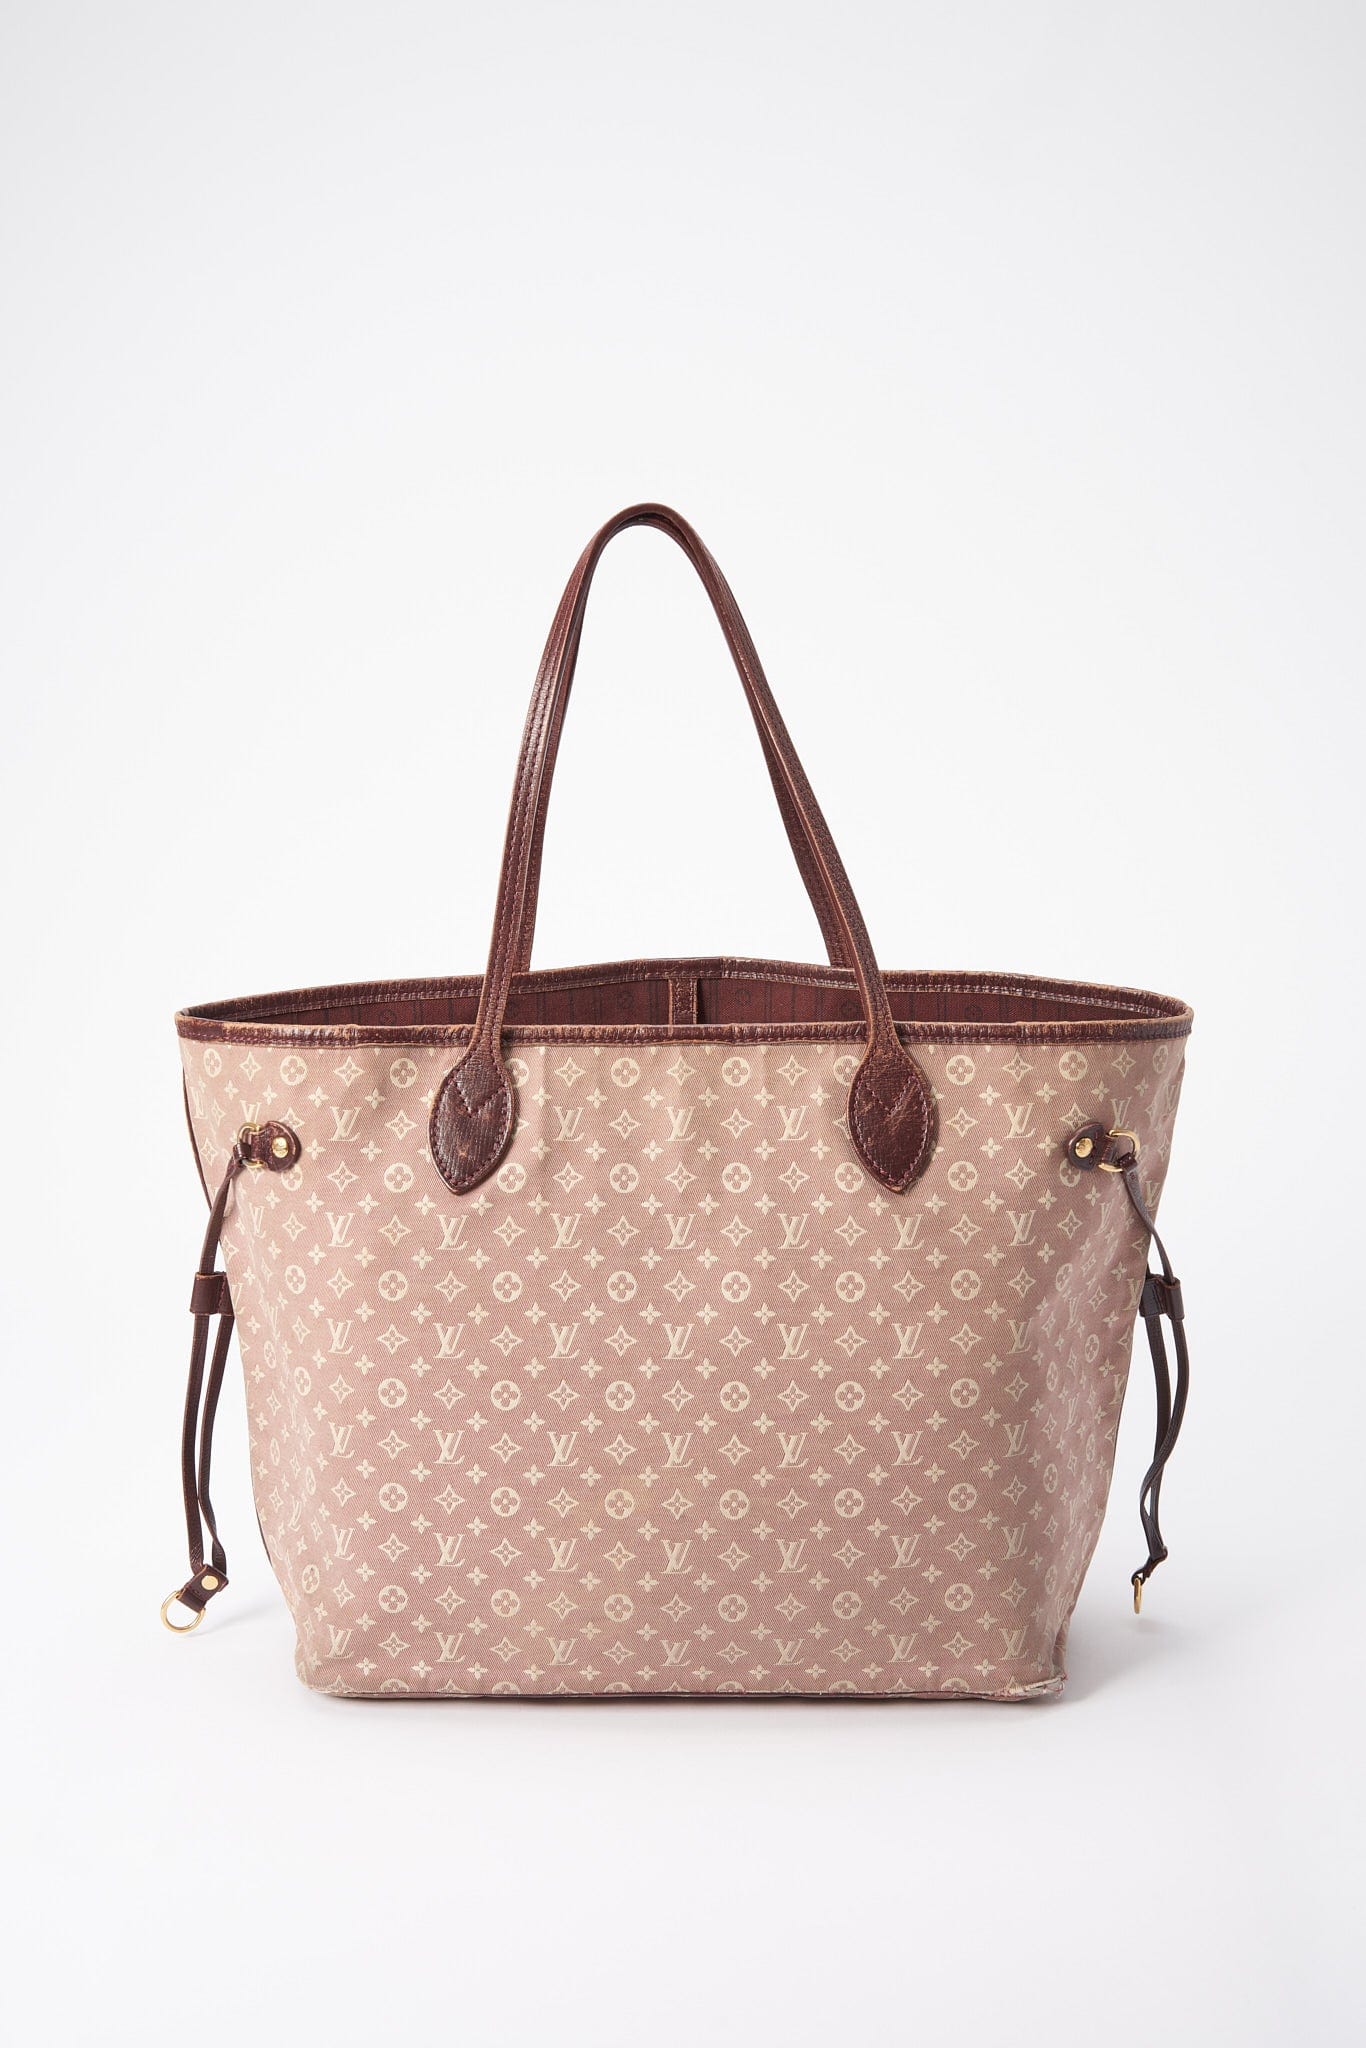 neverfull pink louis